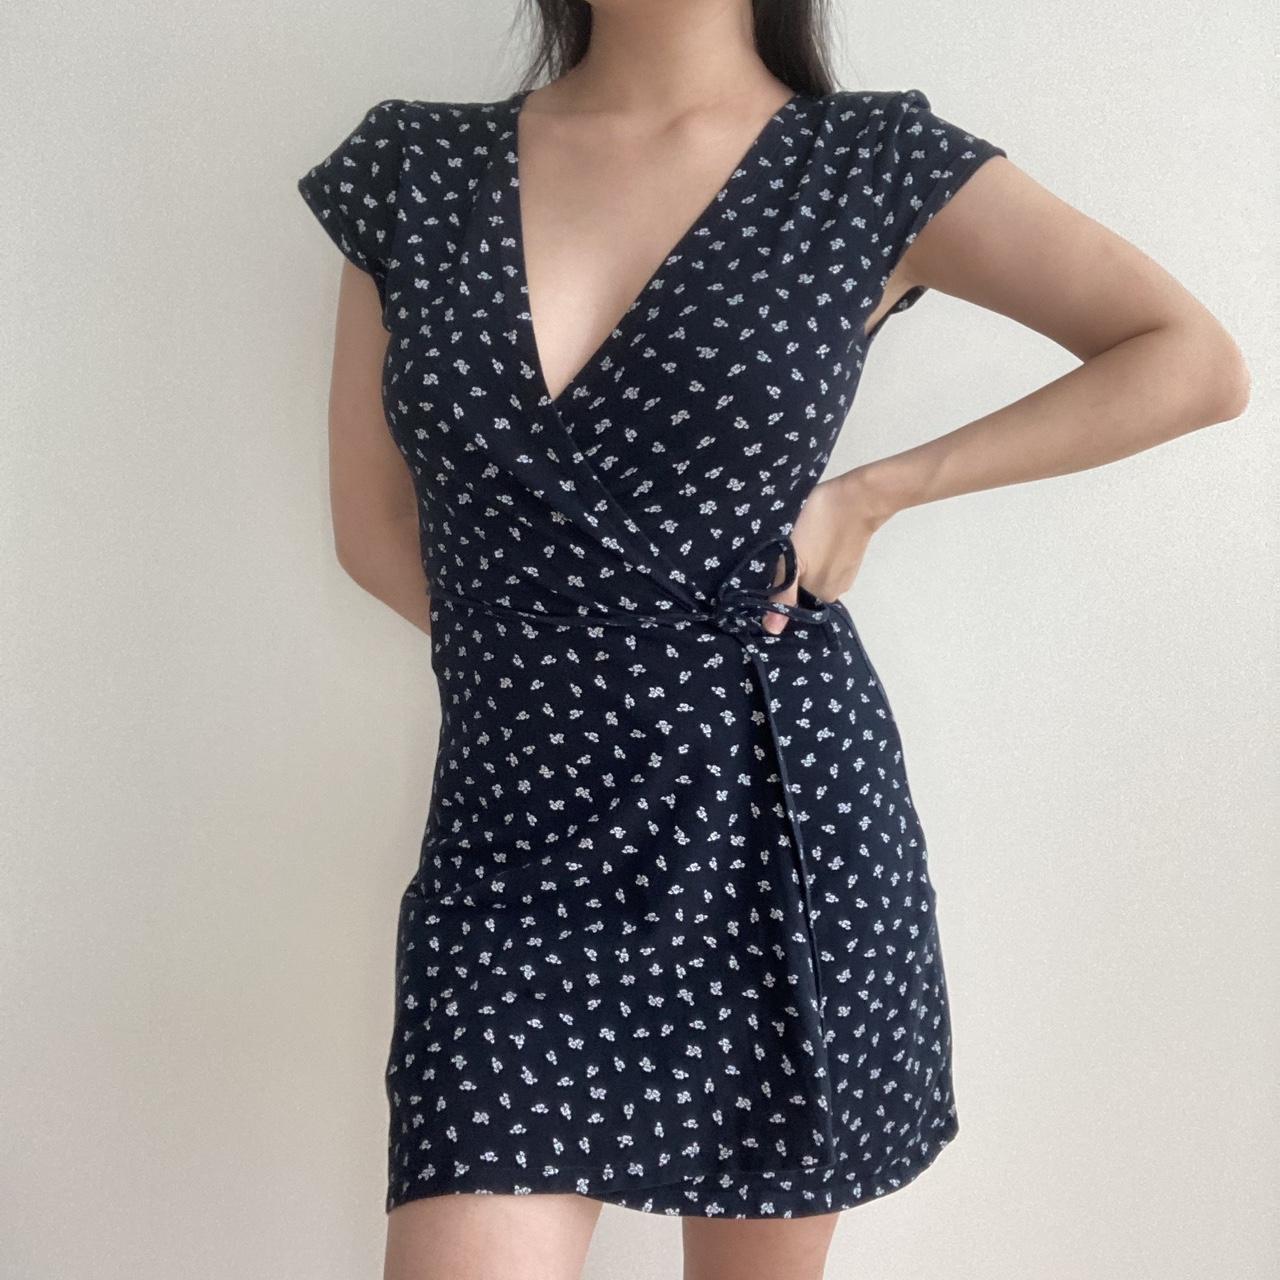 Brandy Melville Wrap Dress - Style with Nihan